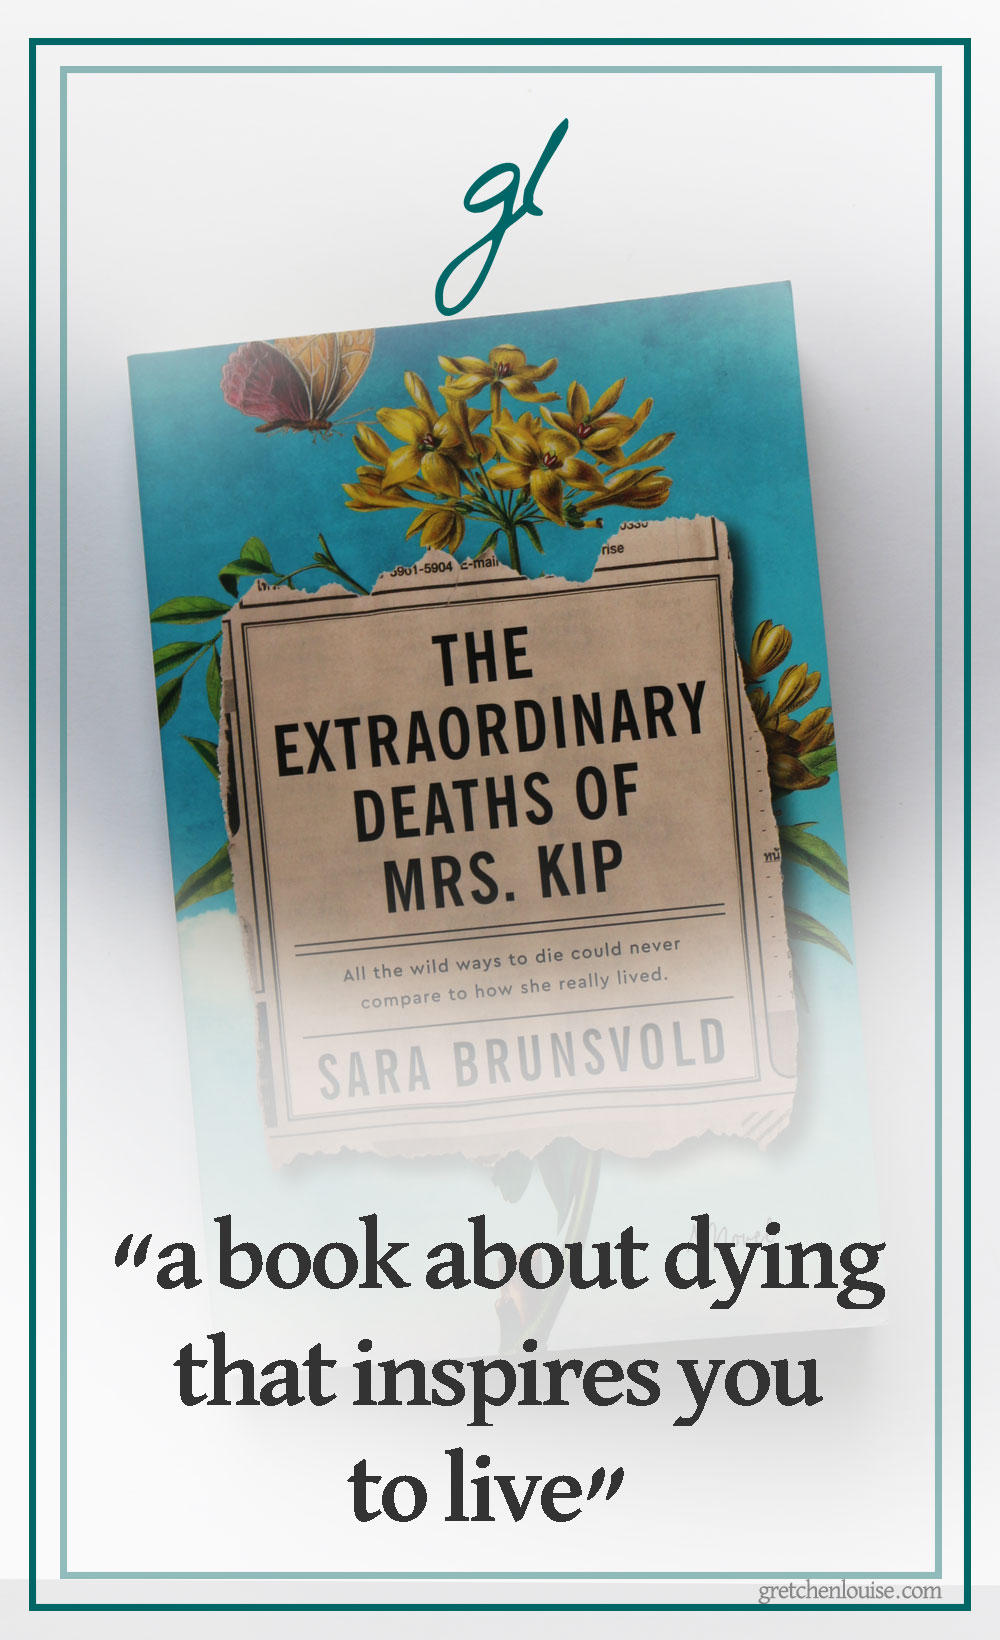 Why would you want to read a book about a dying woman? via @GretLouise